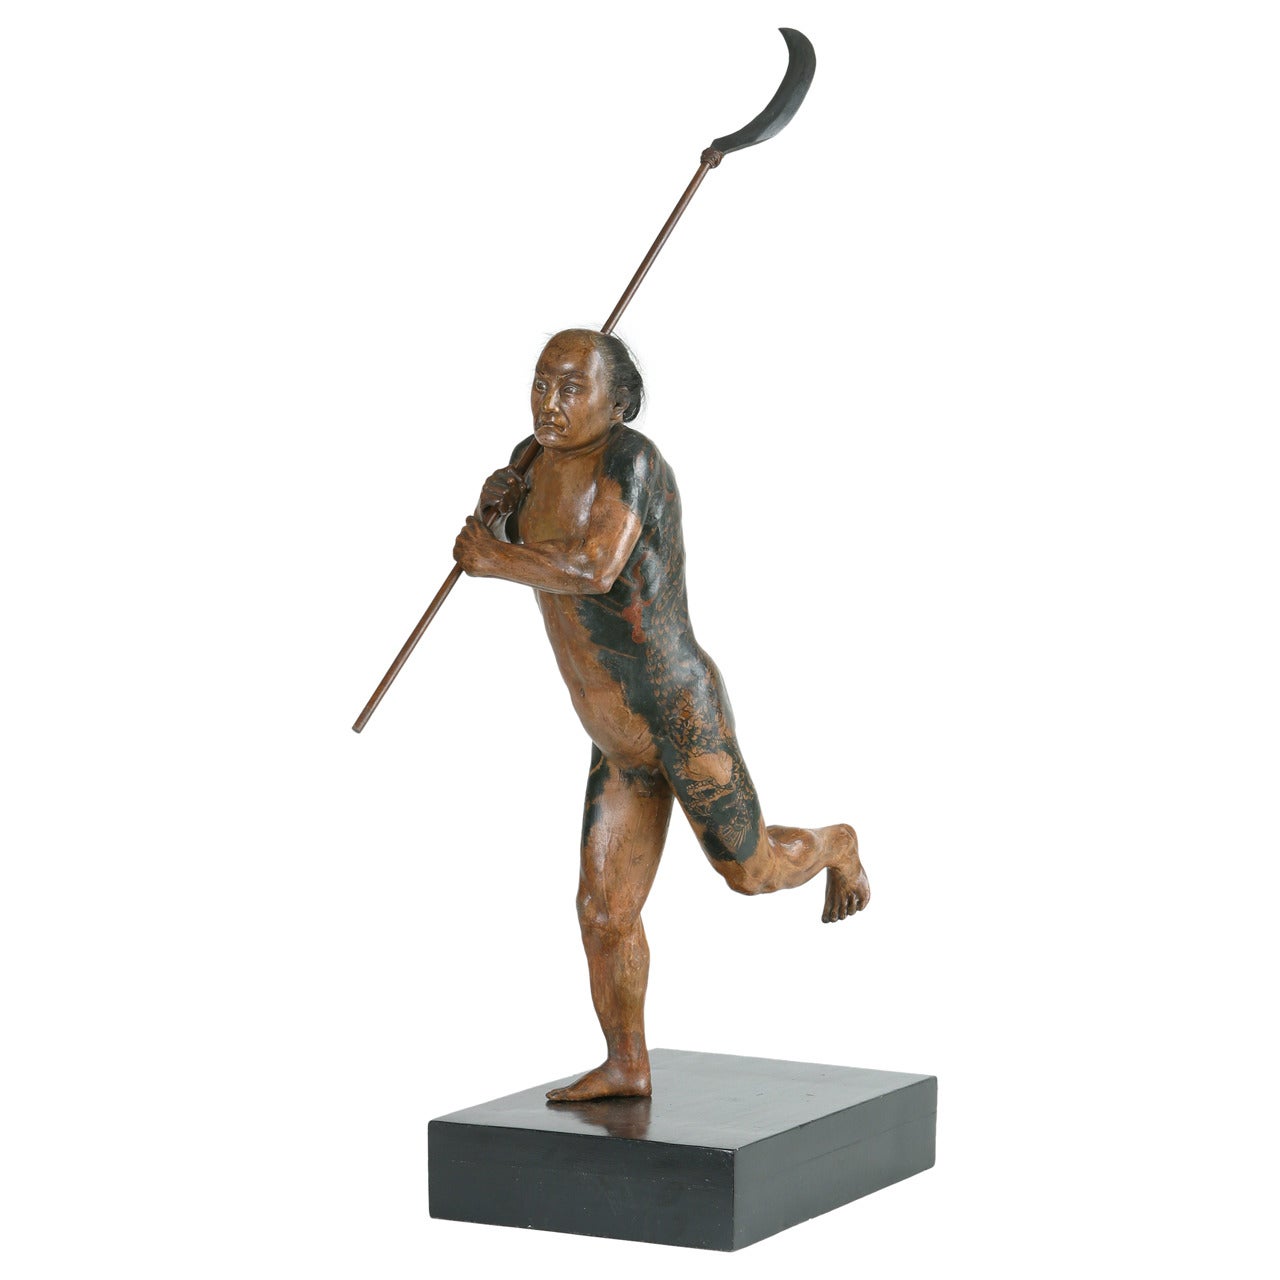 Tattooed Sculpture of a Japanese Running Man For Sale